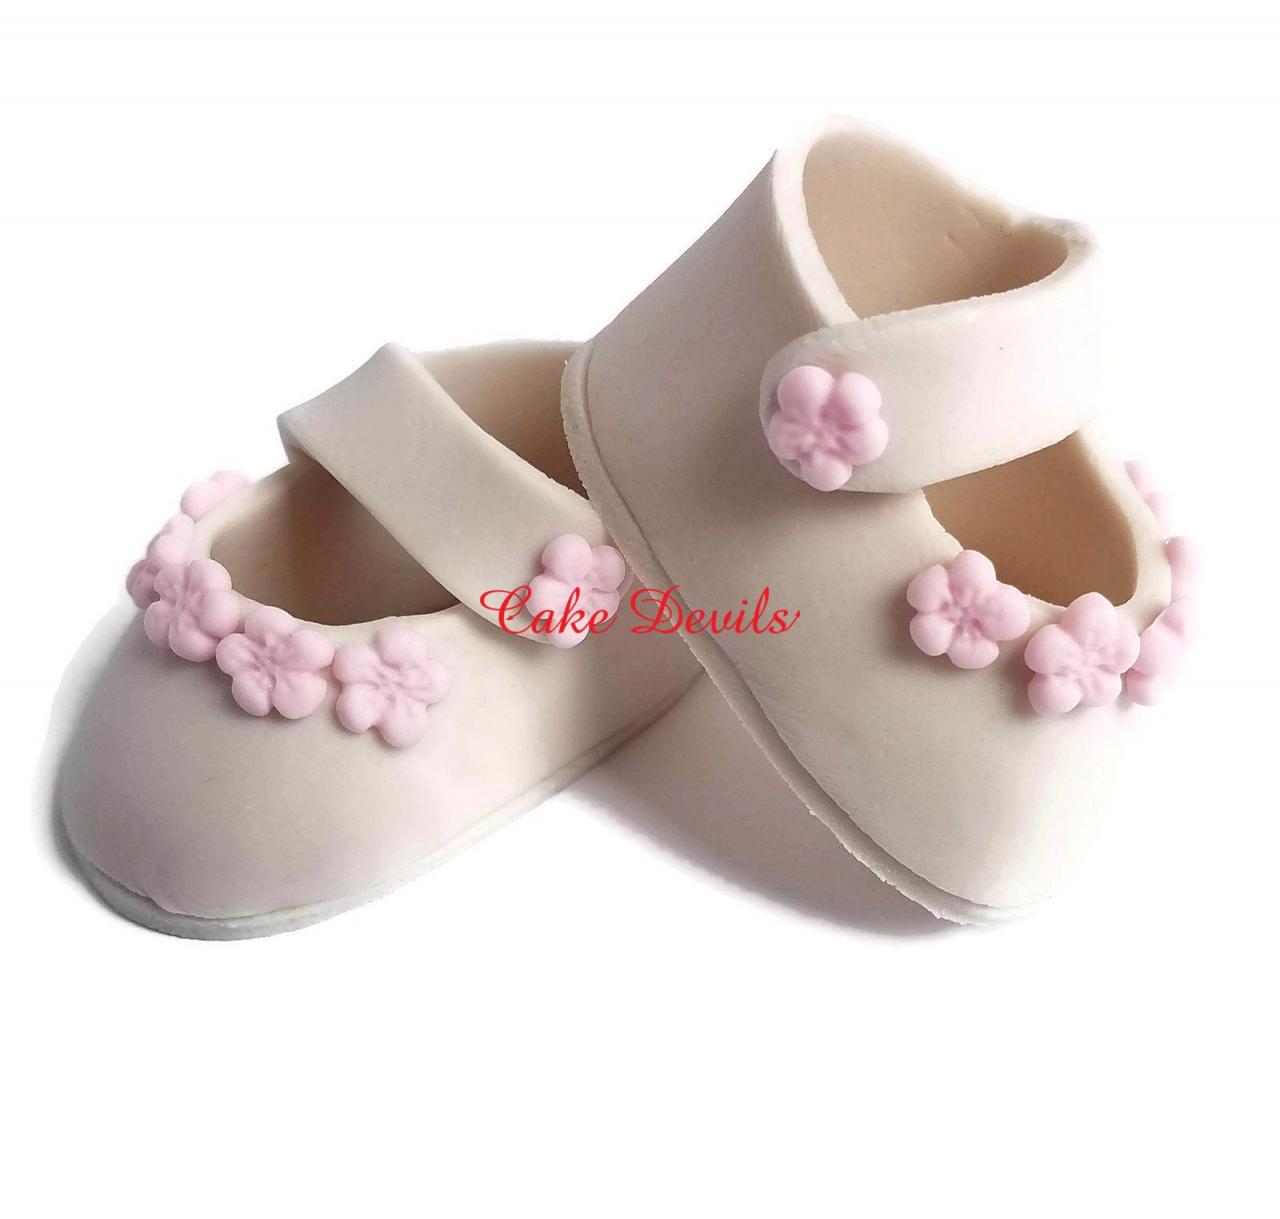 Baby Shower Shoes Cake Topper, Fondant Baby Booties With Flowers, Cake Decorations, Baby Shower Cake Decorations, Handmade Cake Topper